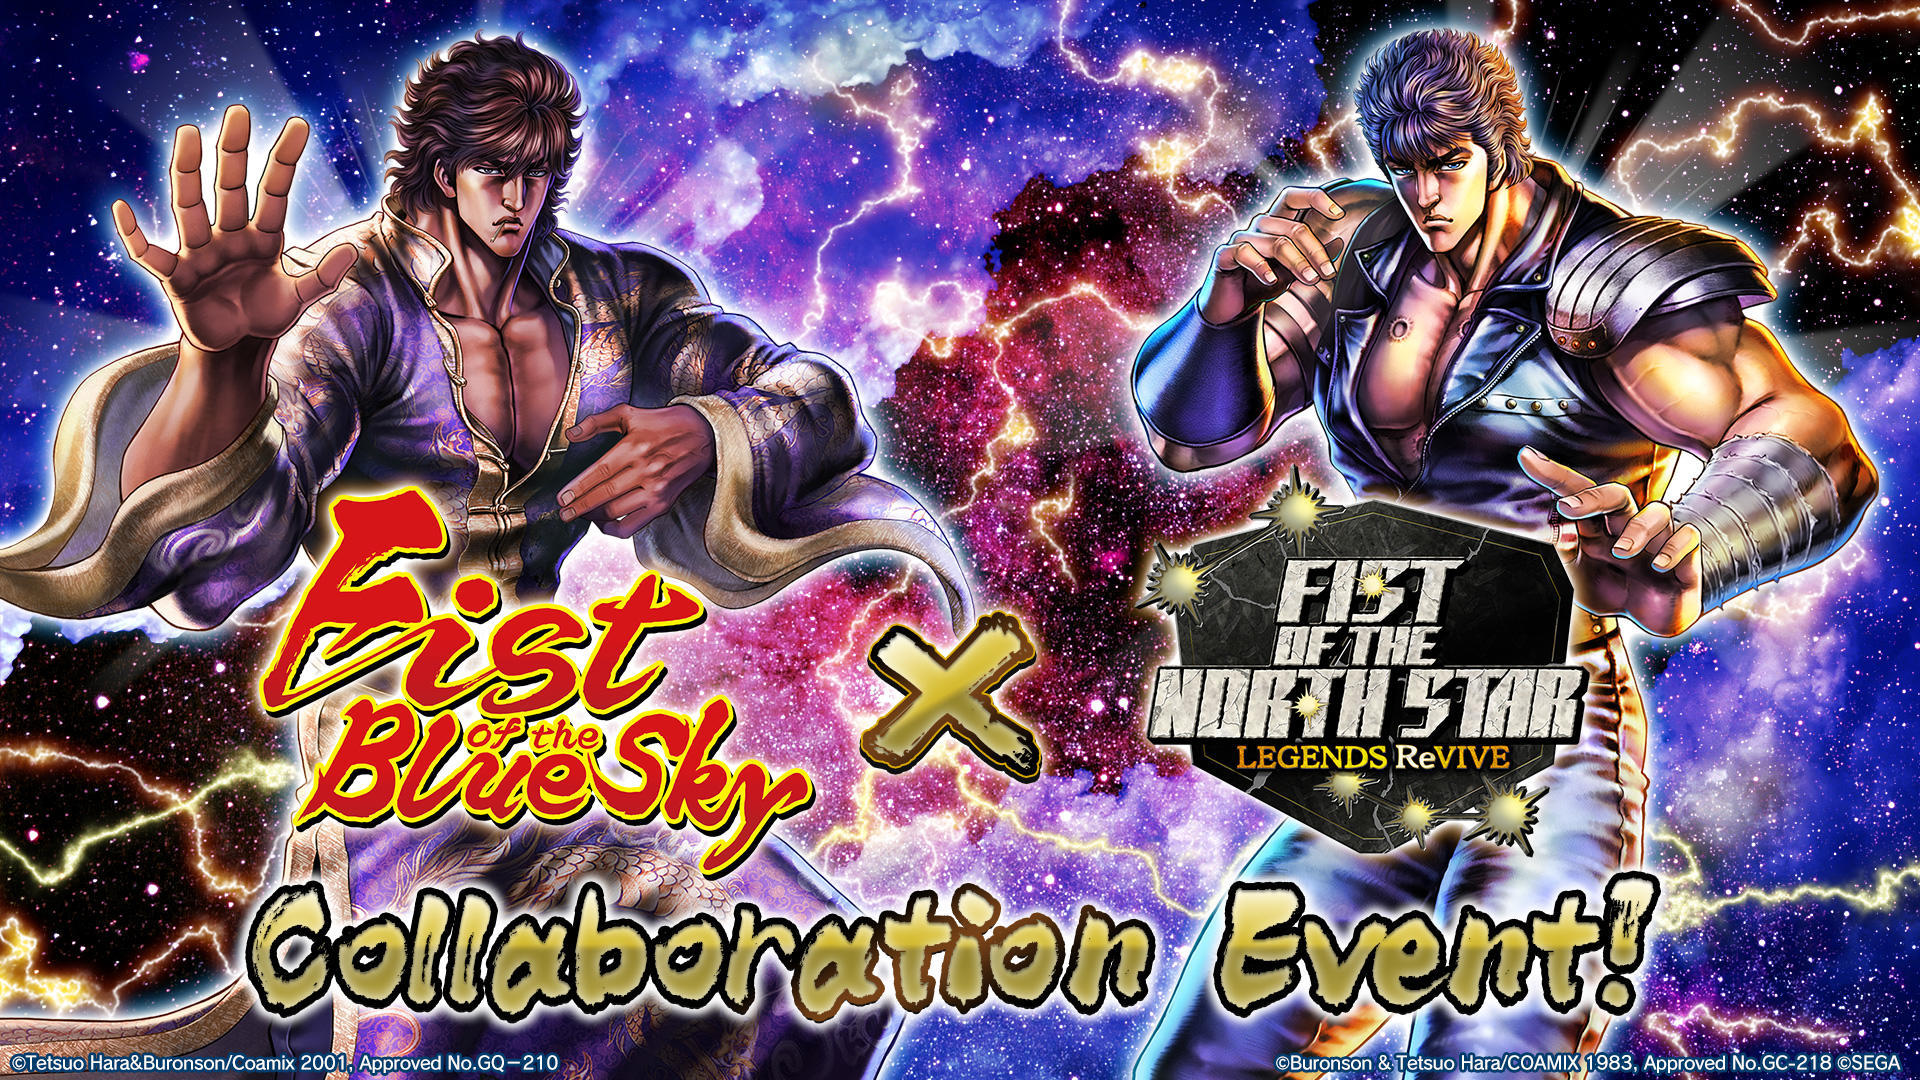 Announcement fist of the blue sky crossover ing soonïnews fist of the north star legends revive fist of the north star legends revive official website